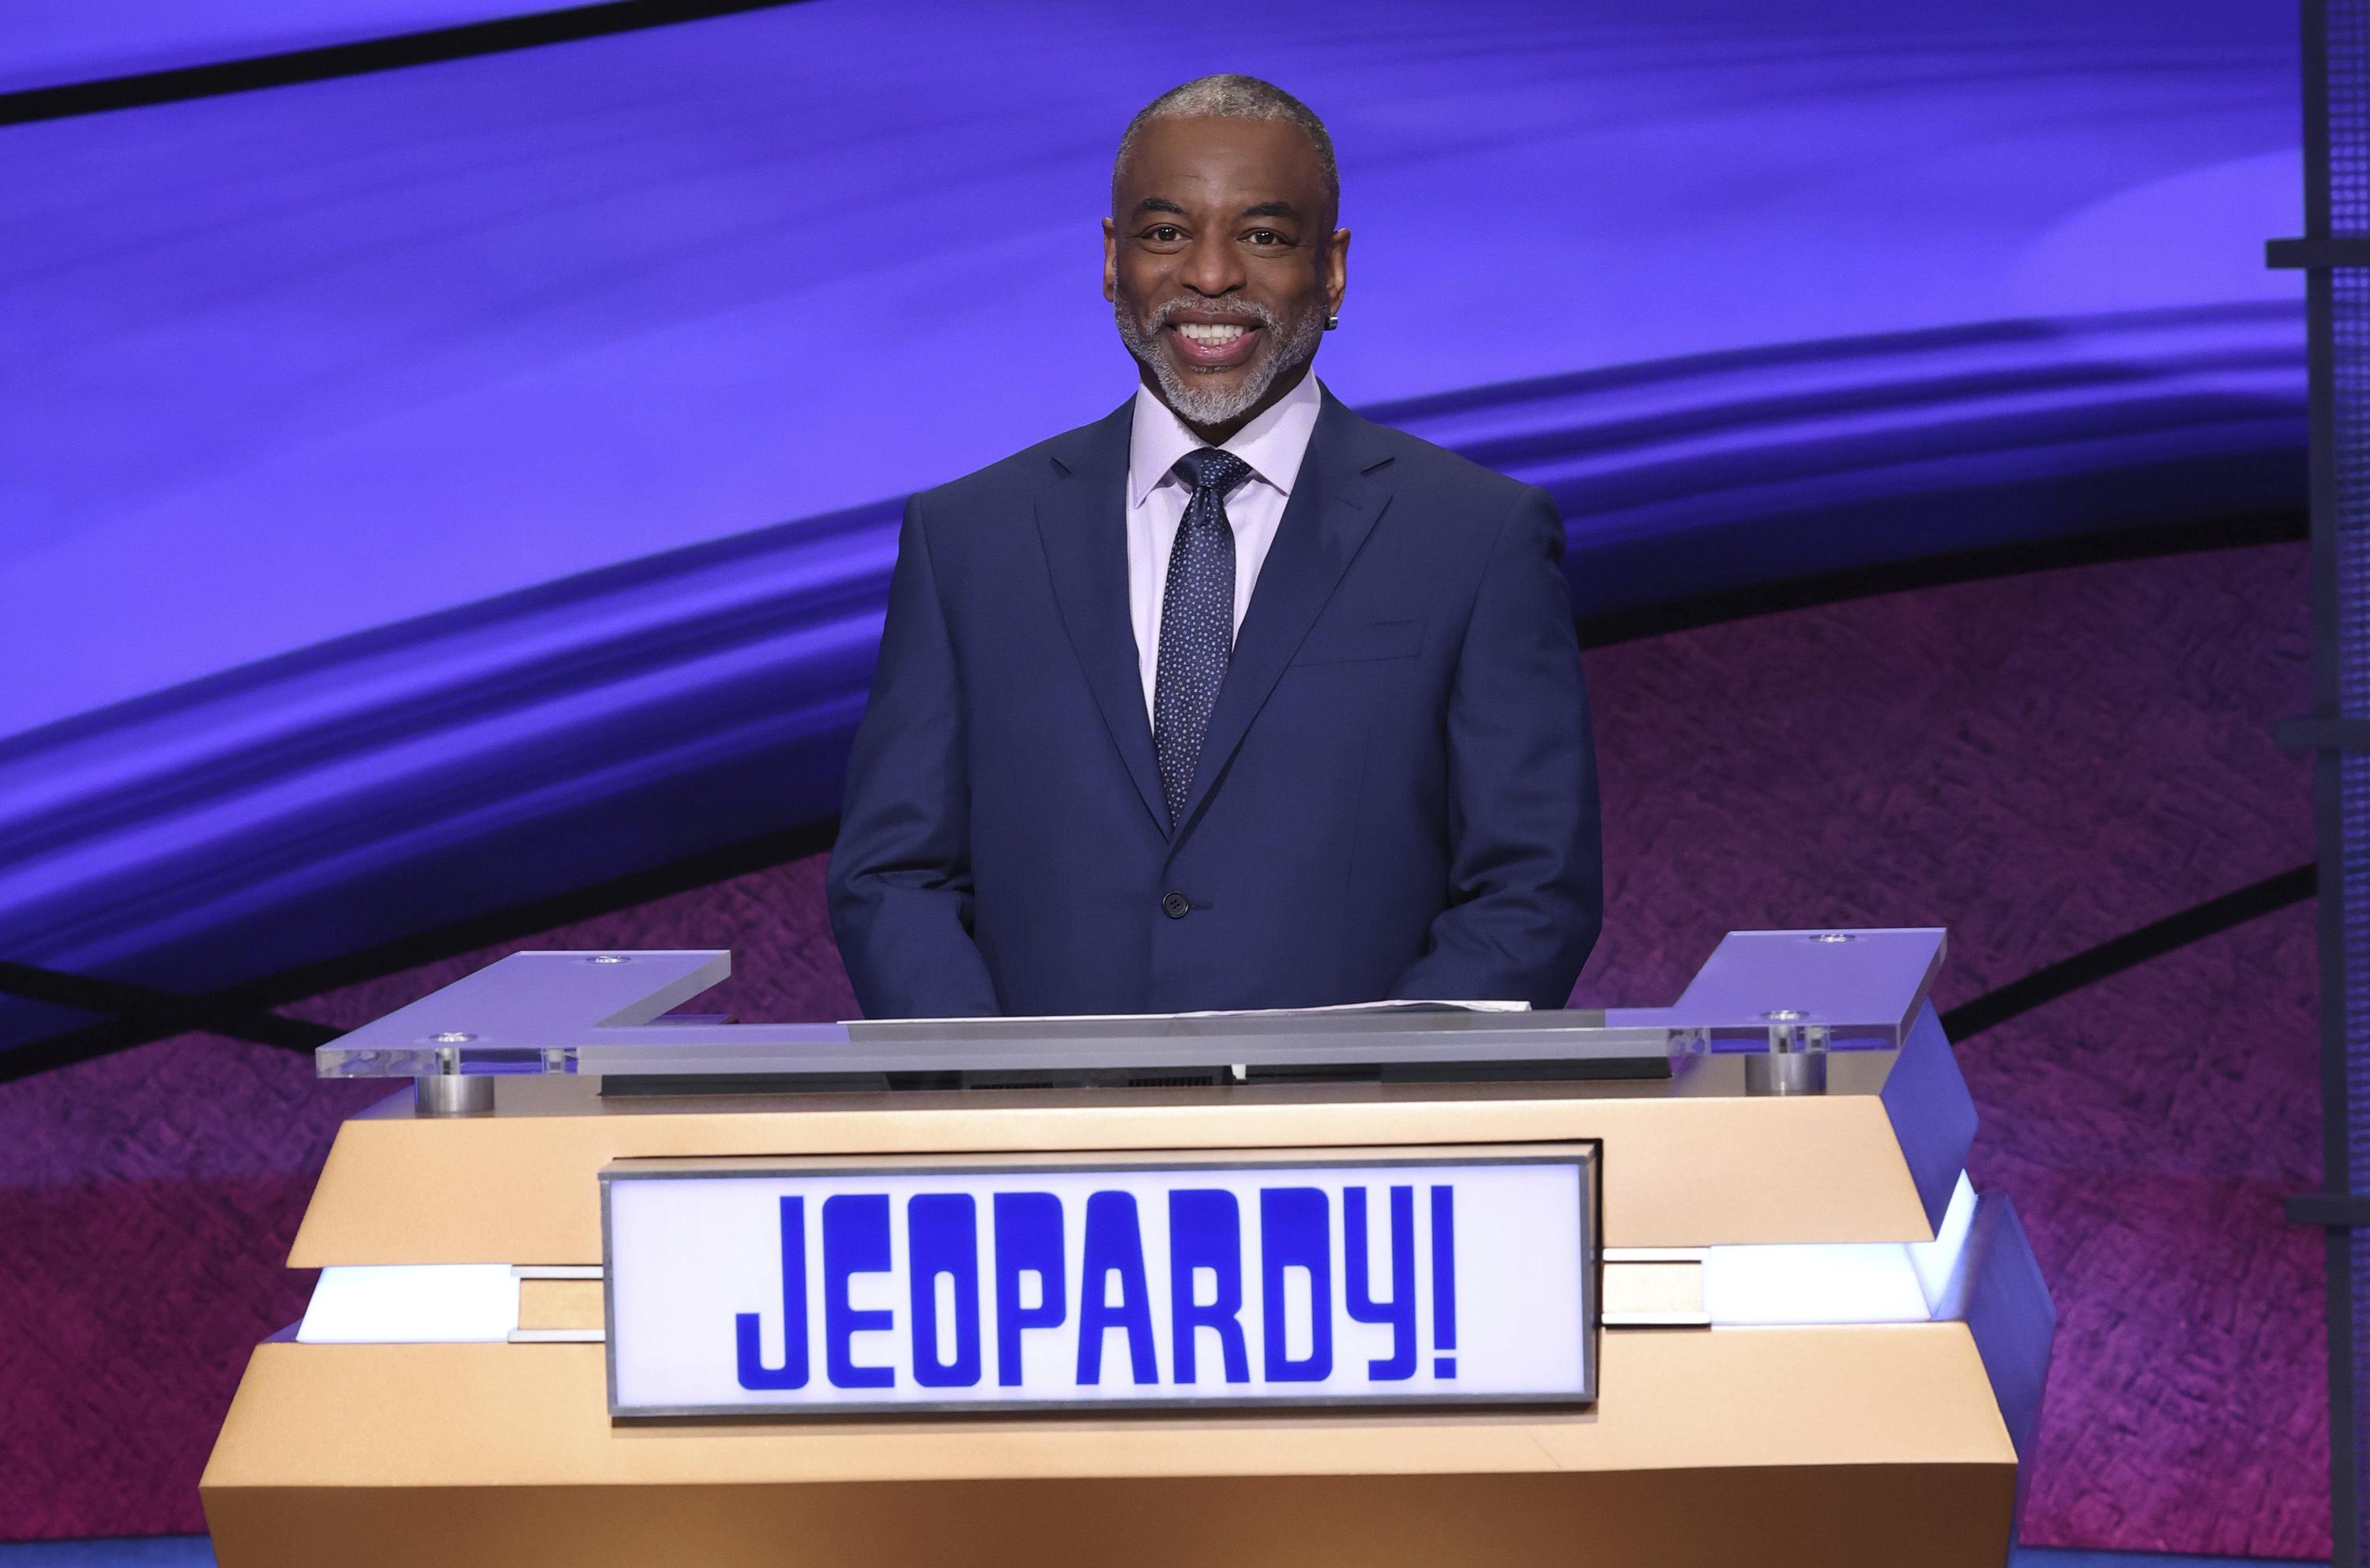 The Internet Reacts To The New Host Of ABC’s ‘Jeopardy!’